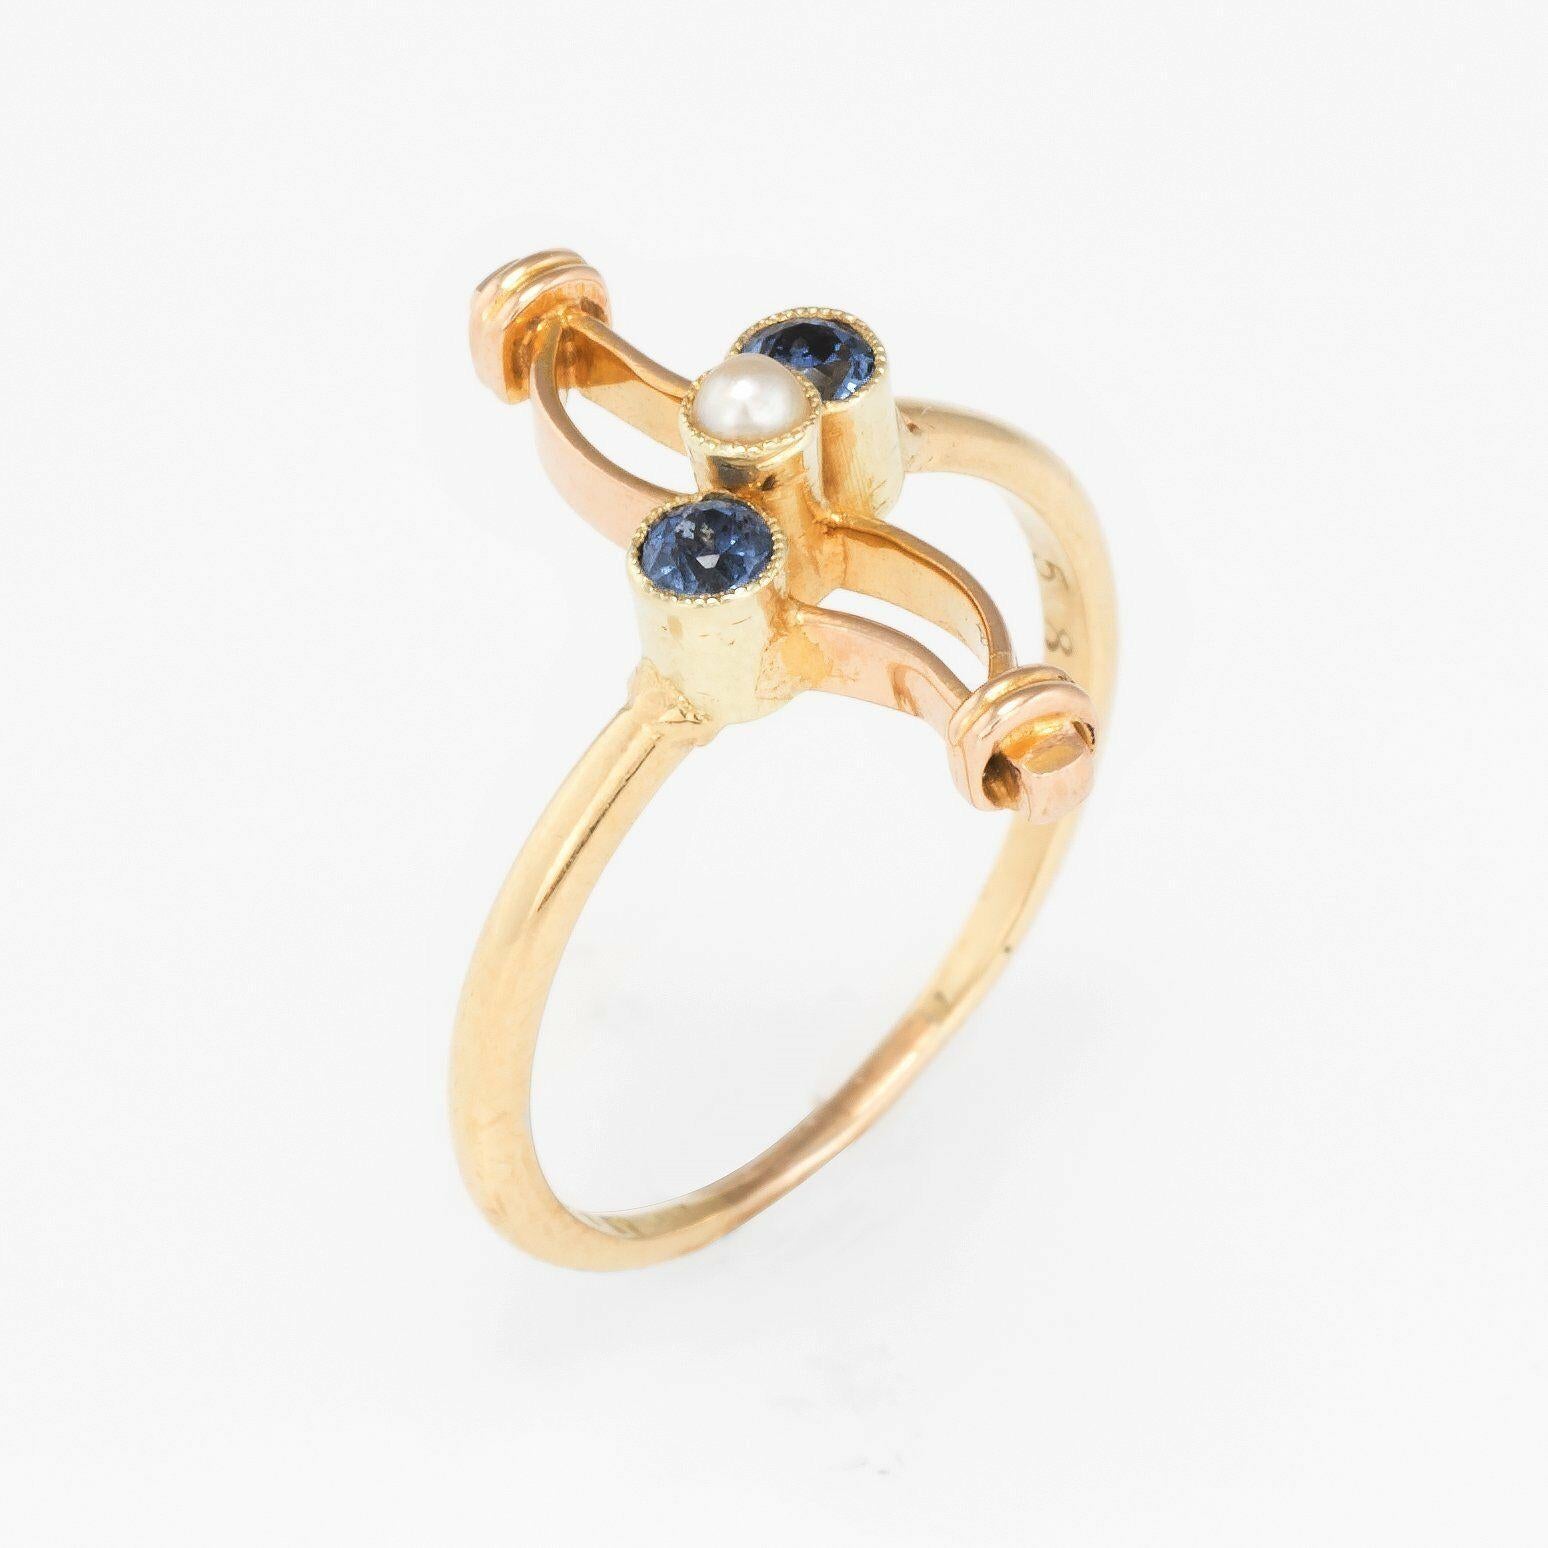 Elegant antique Victorian era ring (circa 1880s to 1900s), crafted in 14 karat yellow gold. 

Centrally mounted blue sapphires are estimated at 0.10 carats each (0.20 carats total estimated weight), accented with one 2.5mm seed pearl. The stones are